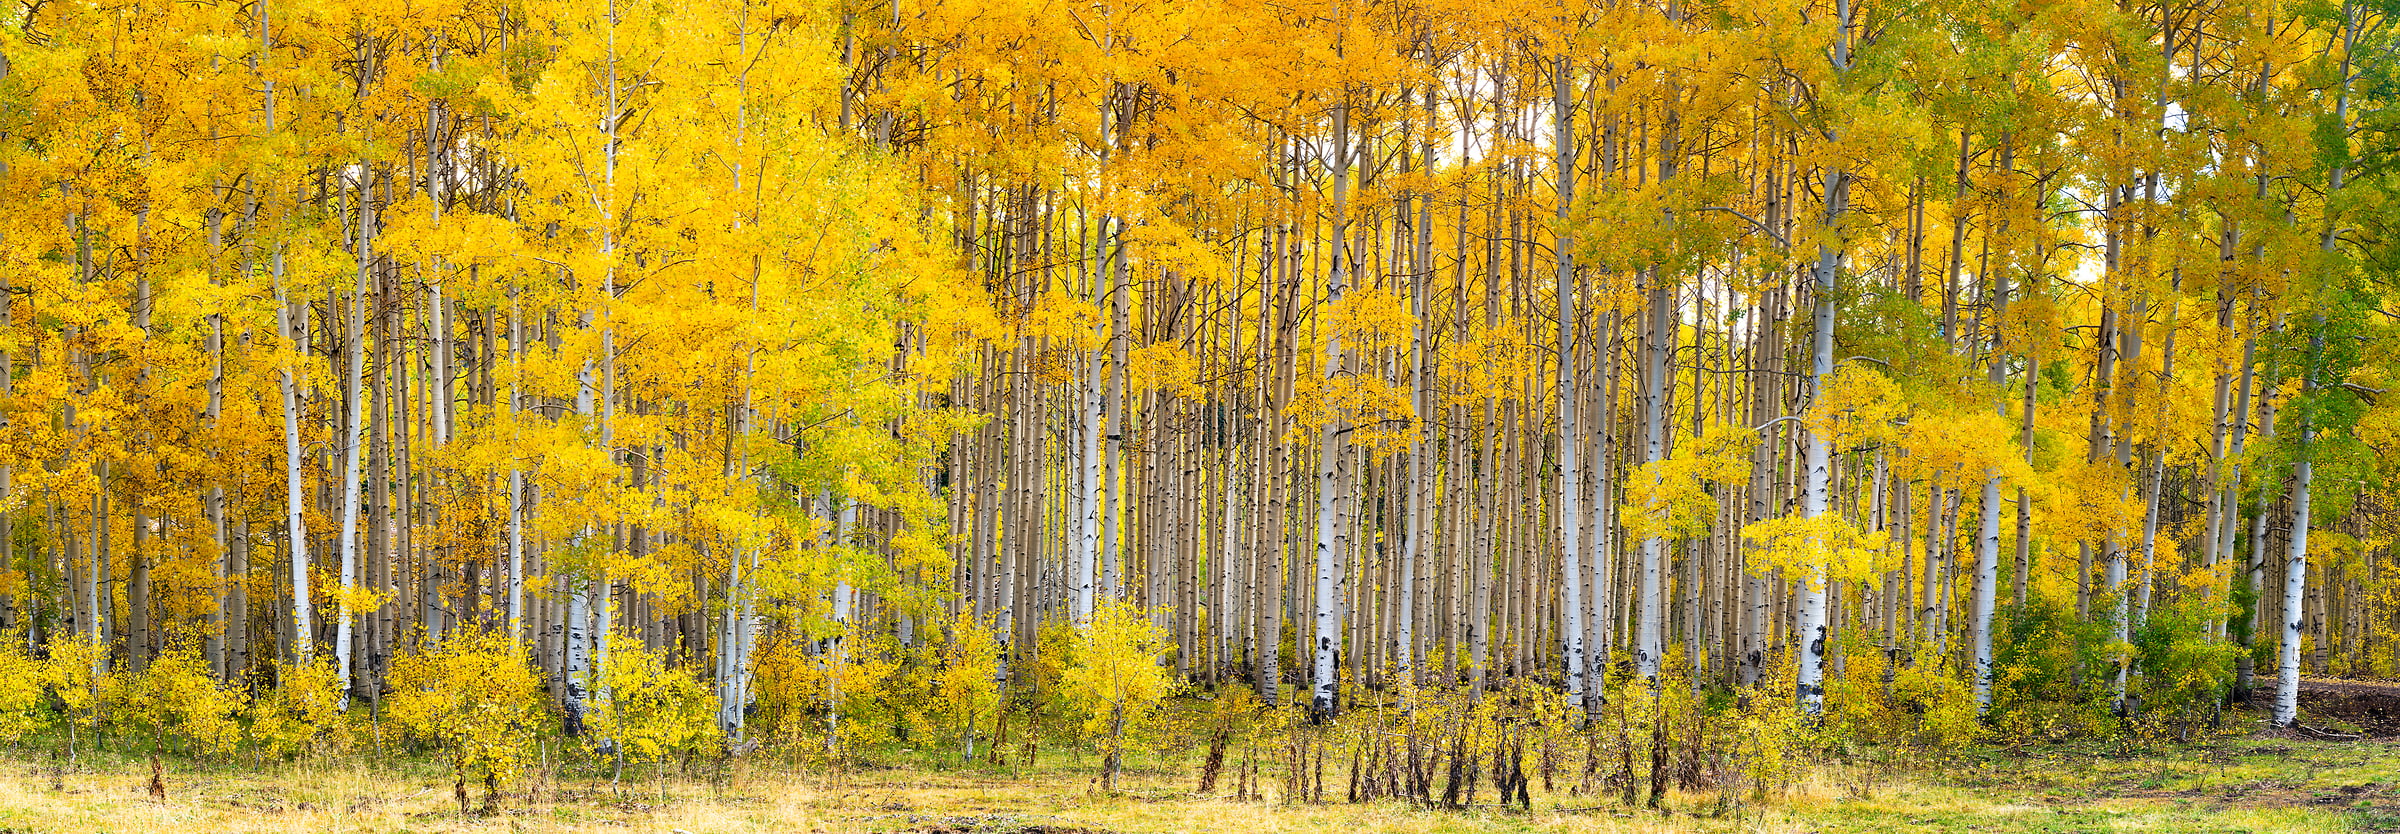 632 megapixels! A very high resolution, wallpaper photo of a forest of aspen trees in autumn; nature photograph created by Phillip Noll in Mancos, Colorado